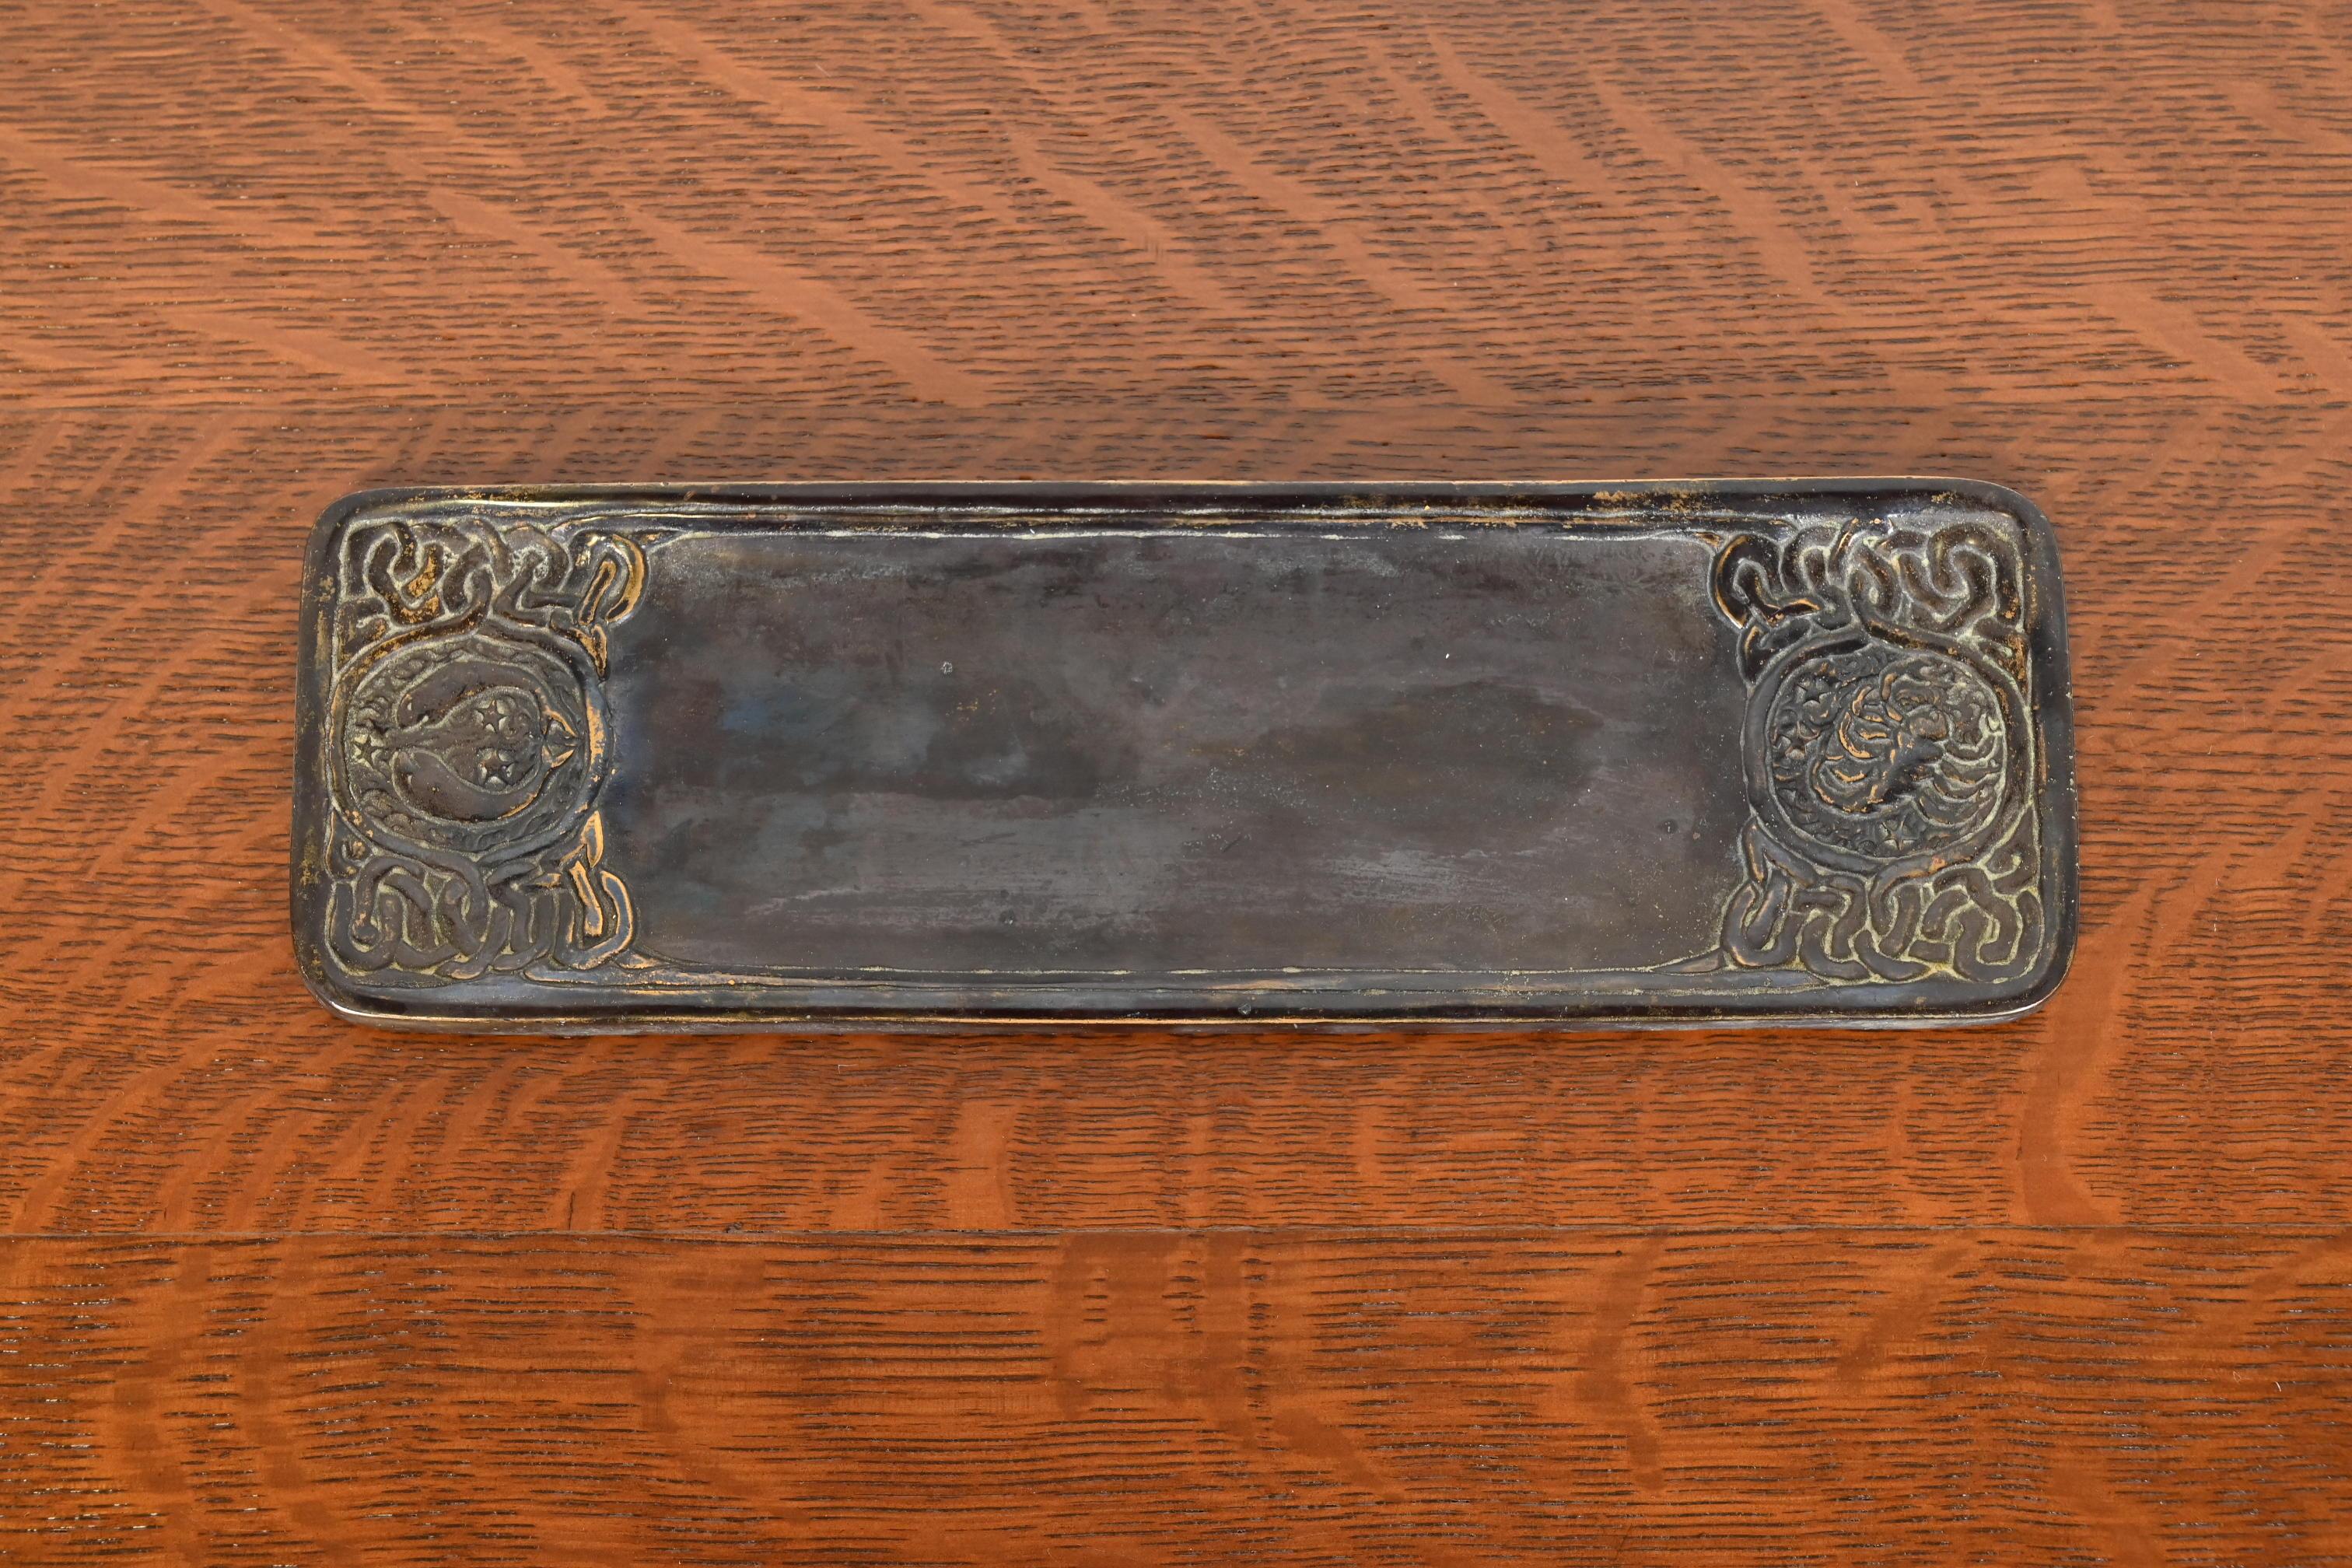 A gorgeous Art Deco period patinated bronze pen tray featuring symbols of the Zodiac.

By Tiffany Studios

New York, USA, Early 20th century

Measures: 10.13